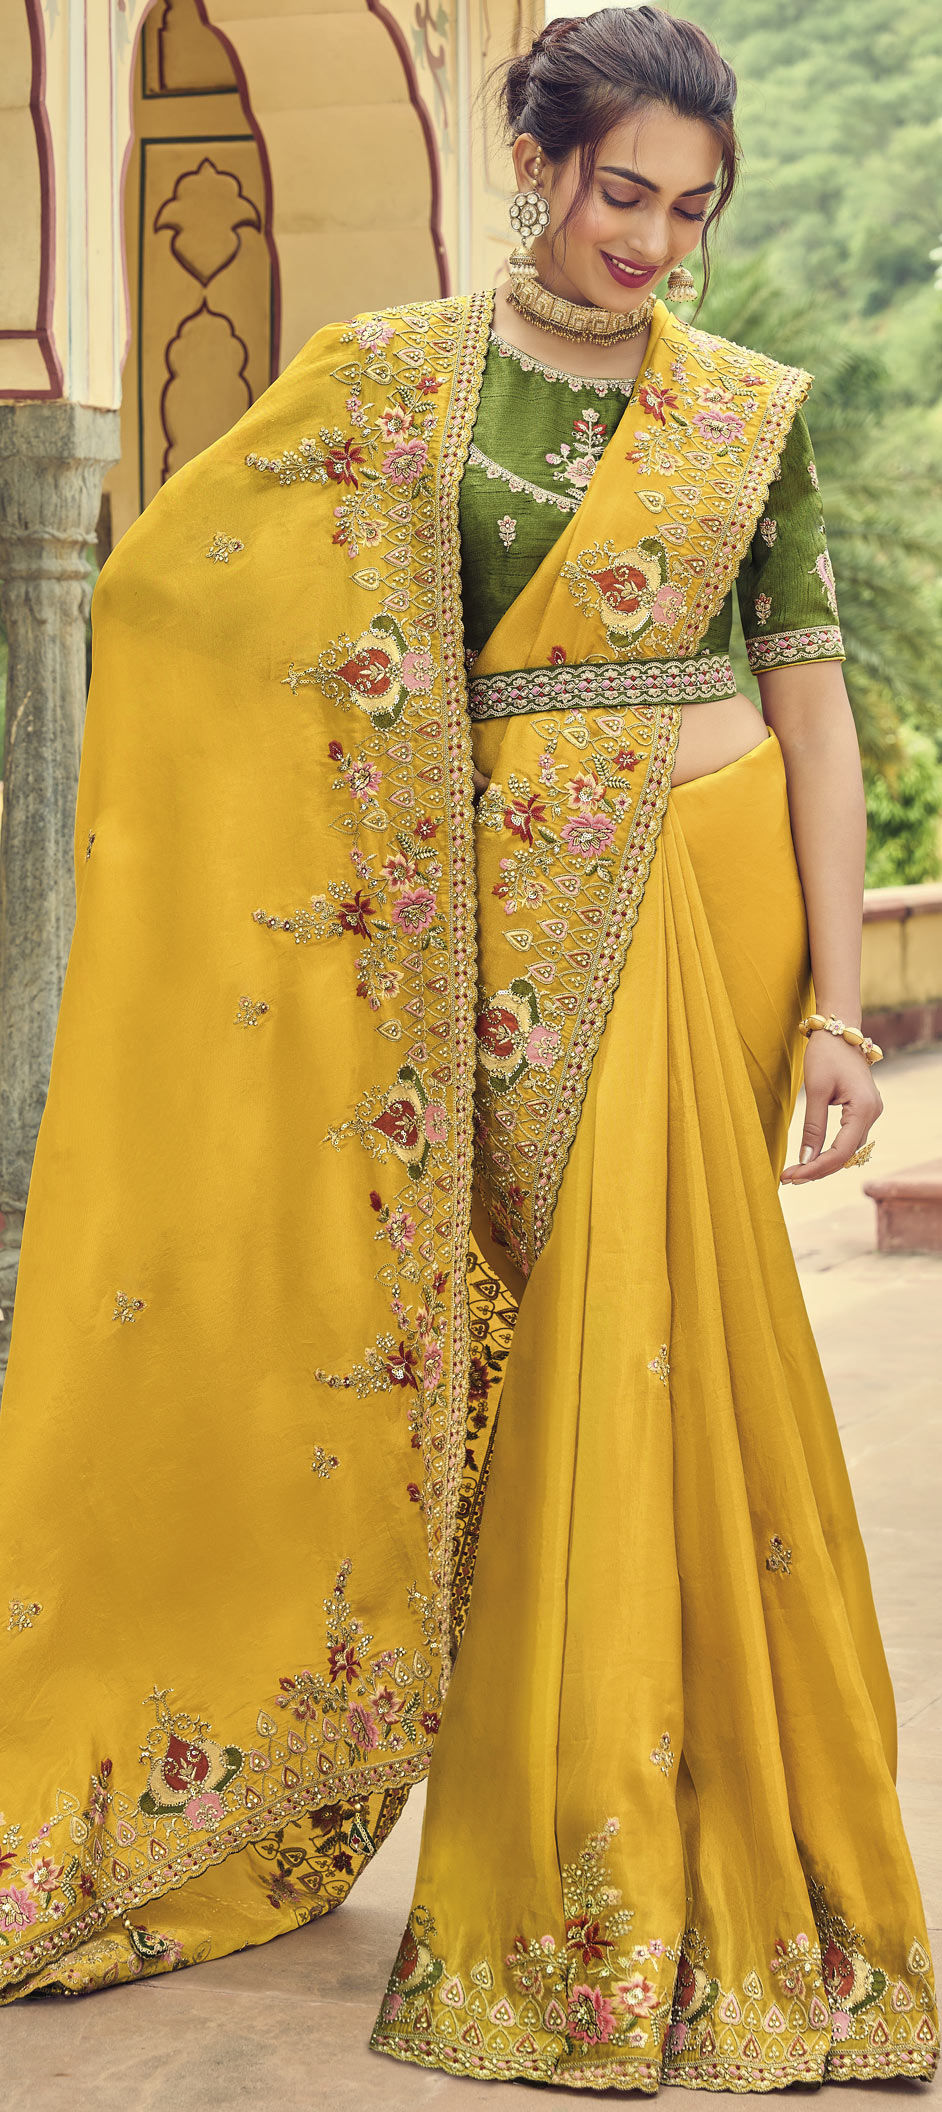 Elevate Your Style: Trending Engagement Saree Ideas for Women in